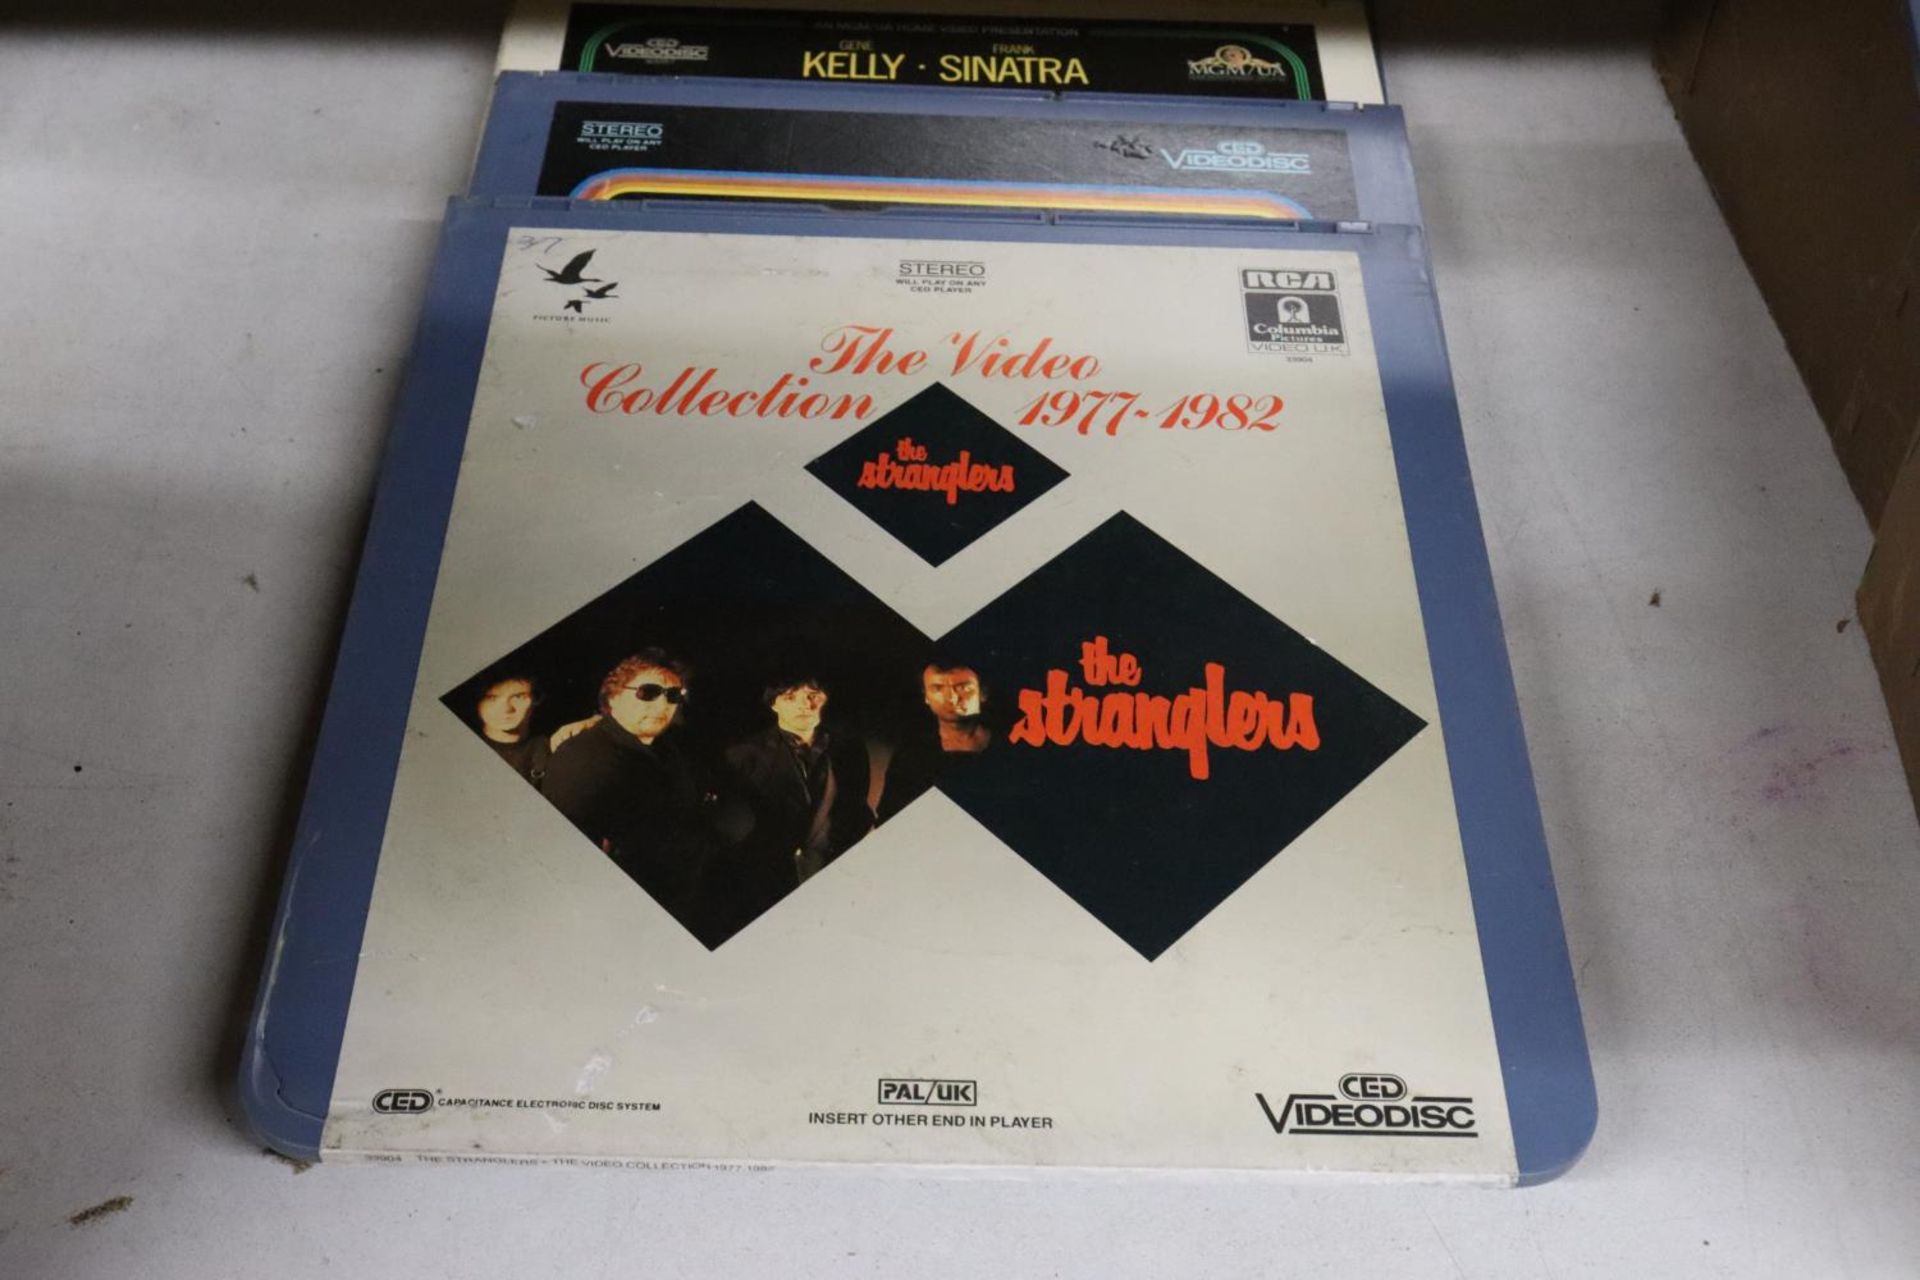 A COLLECTION OF VINTAGE VIDEO DISCS TO INCLUDE FRANK SINATRA 'ON THE TOWN', THE STRANGLERS, PETER - Image 3 of 8